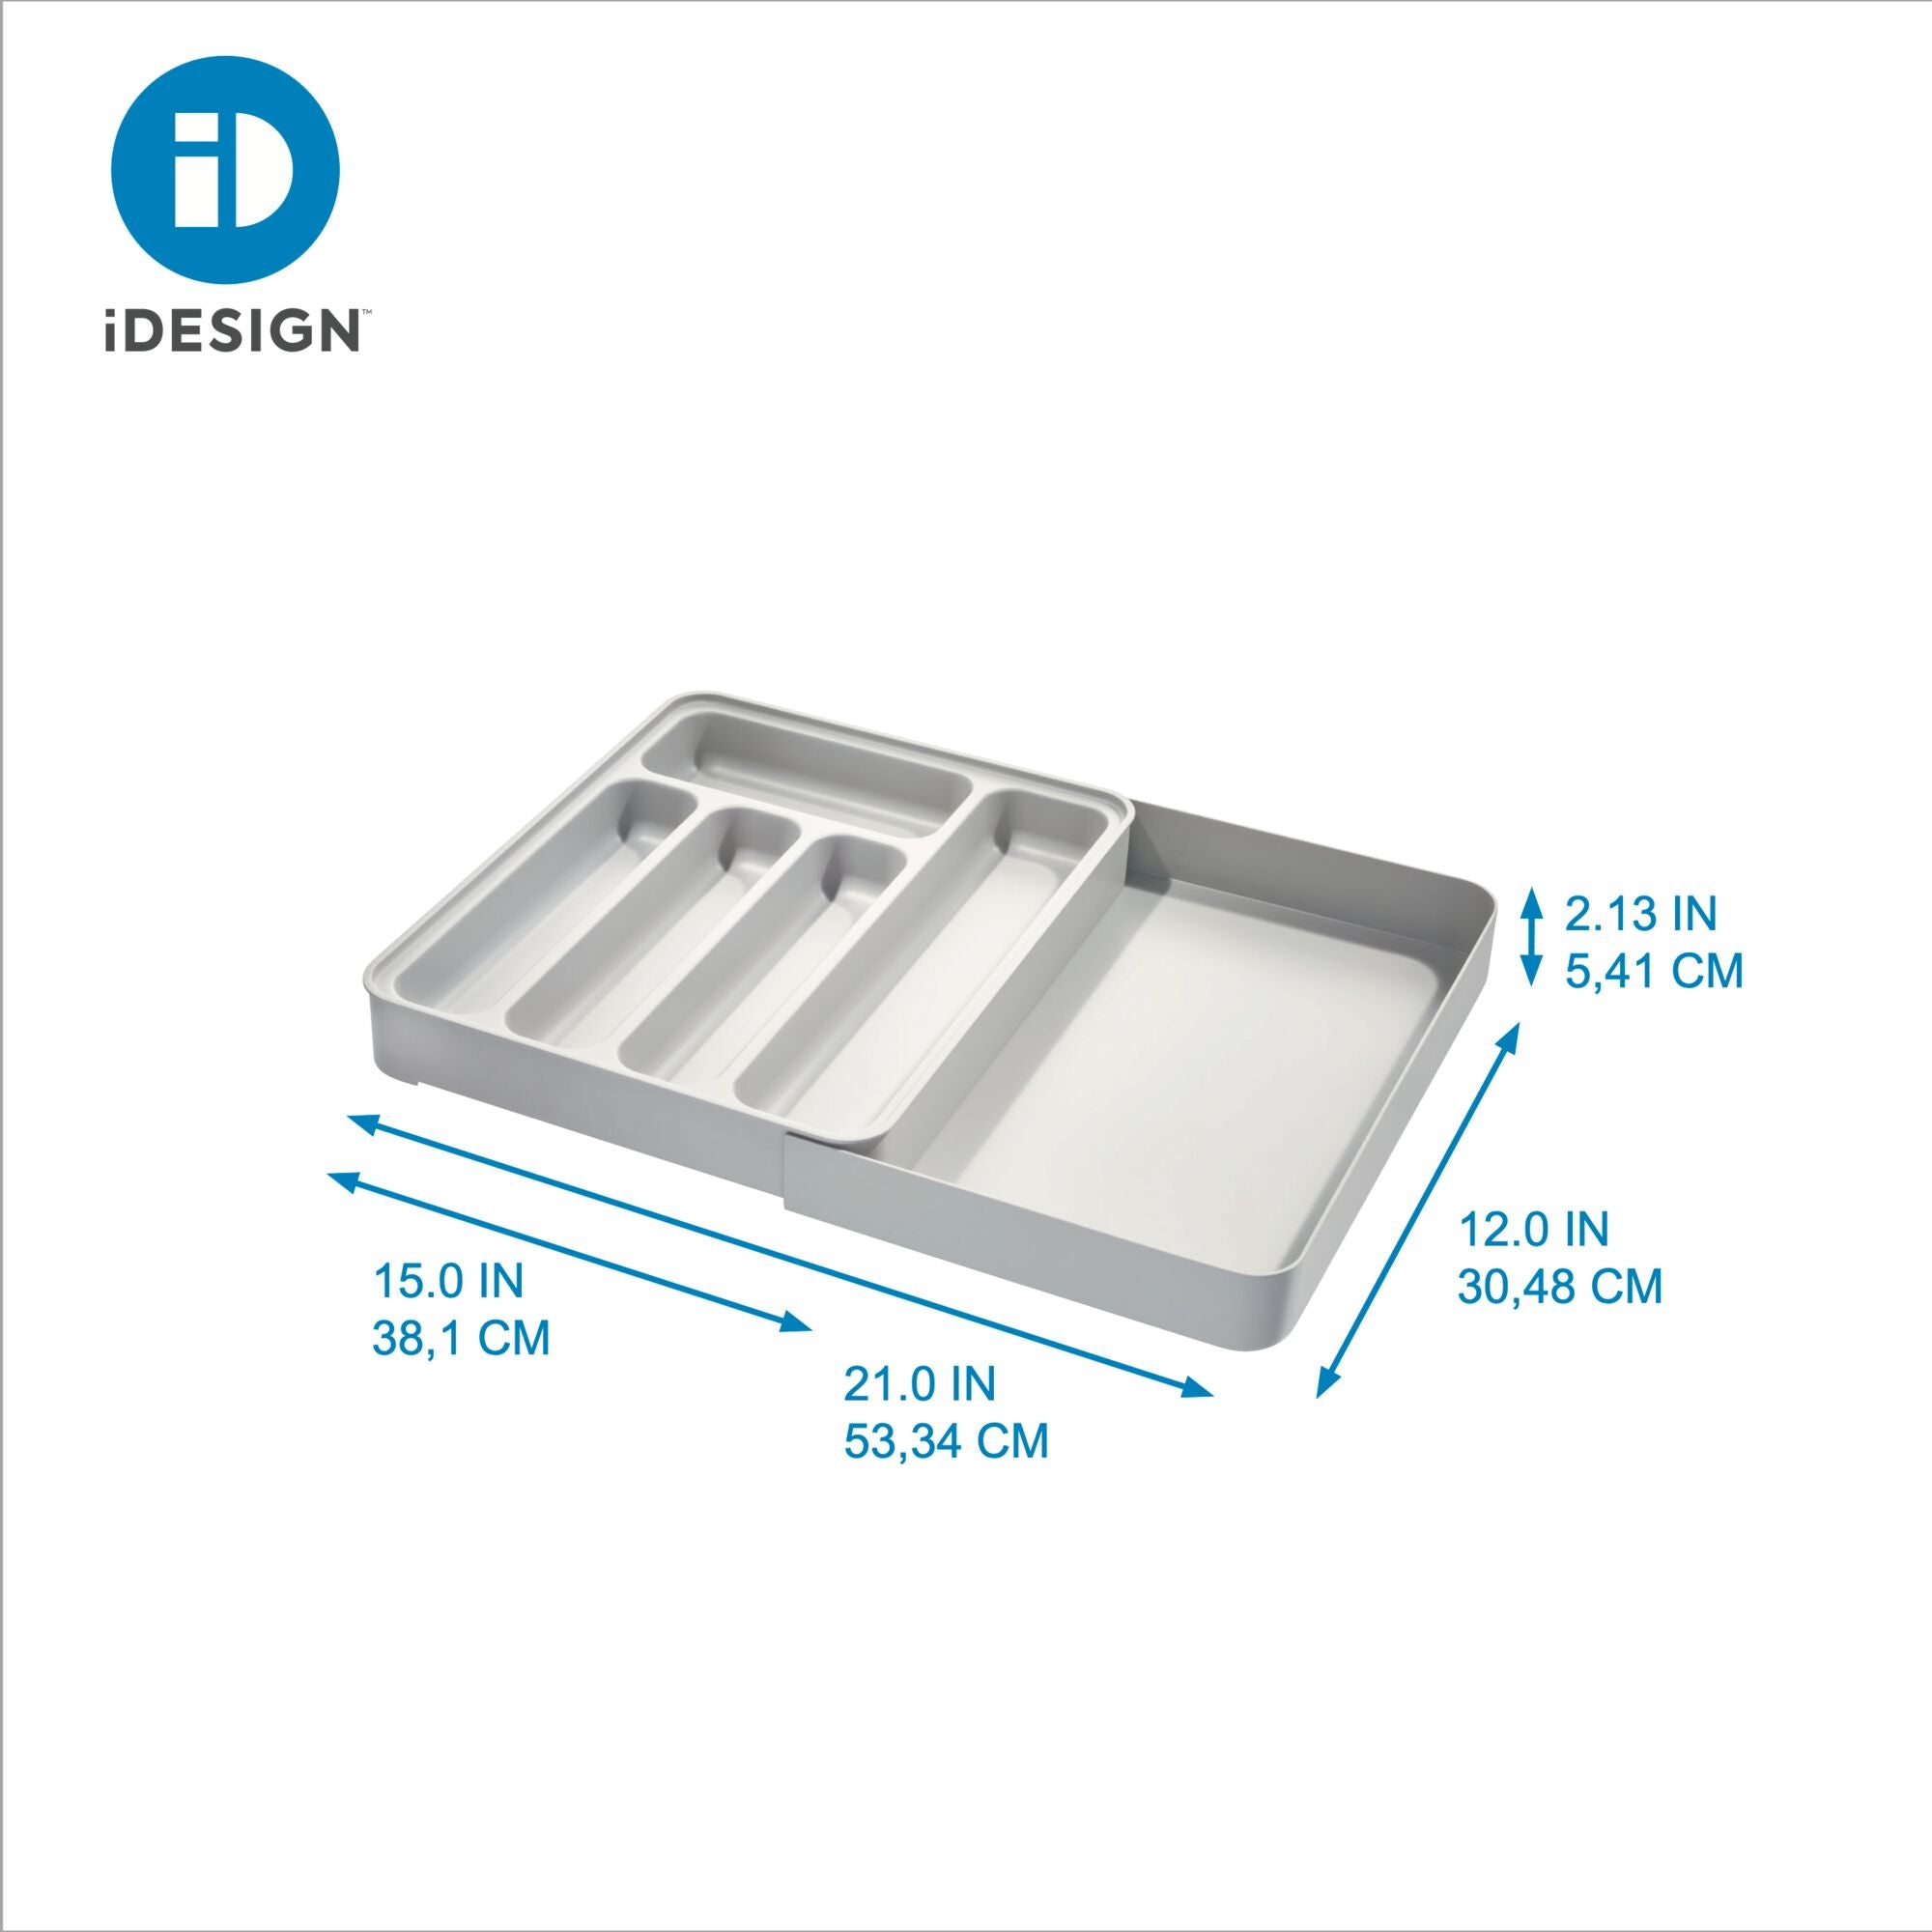 Idesign Clarity BPA-Free Plastic Customizable In-Drawer Storage Organizer Dividers, 16 inch x 9.2 inch x 1.99 inch, Adjustable